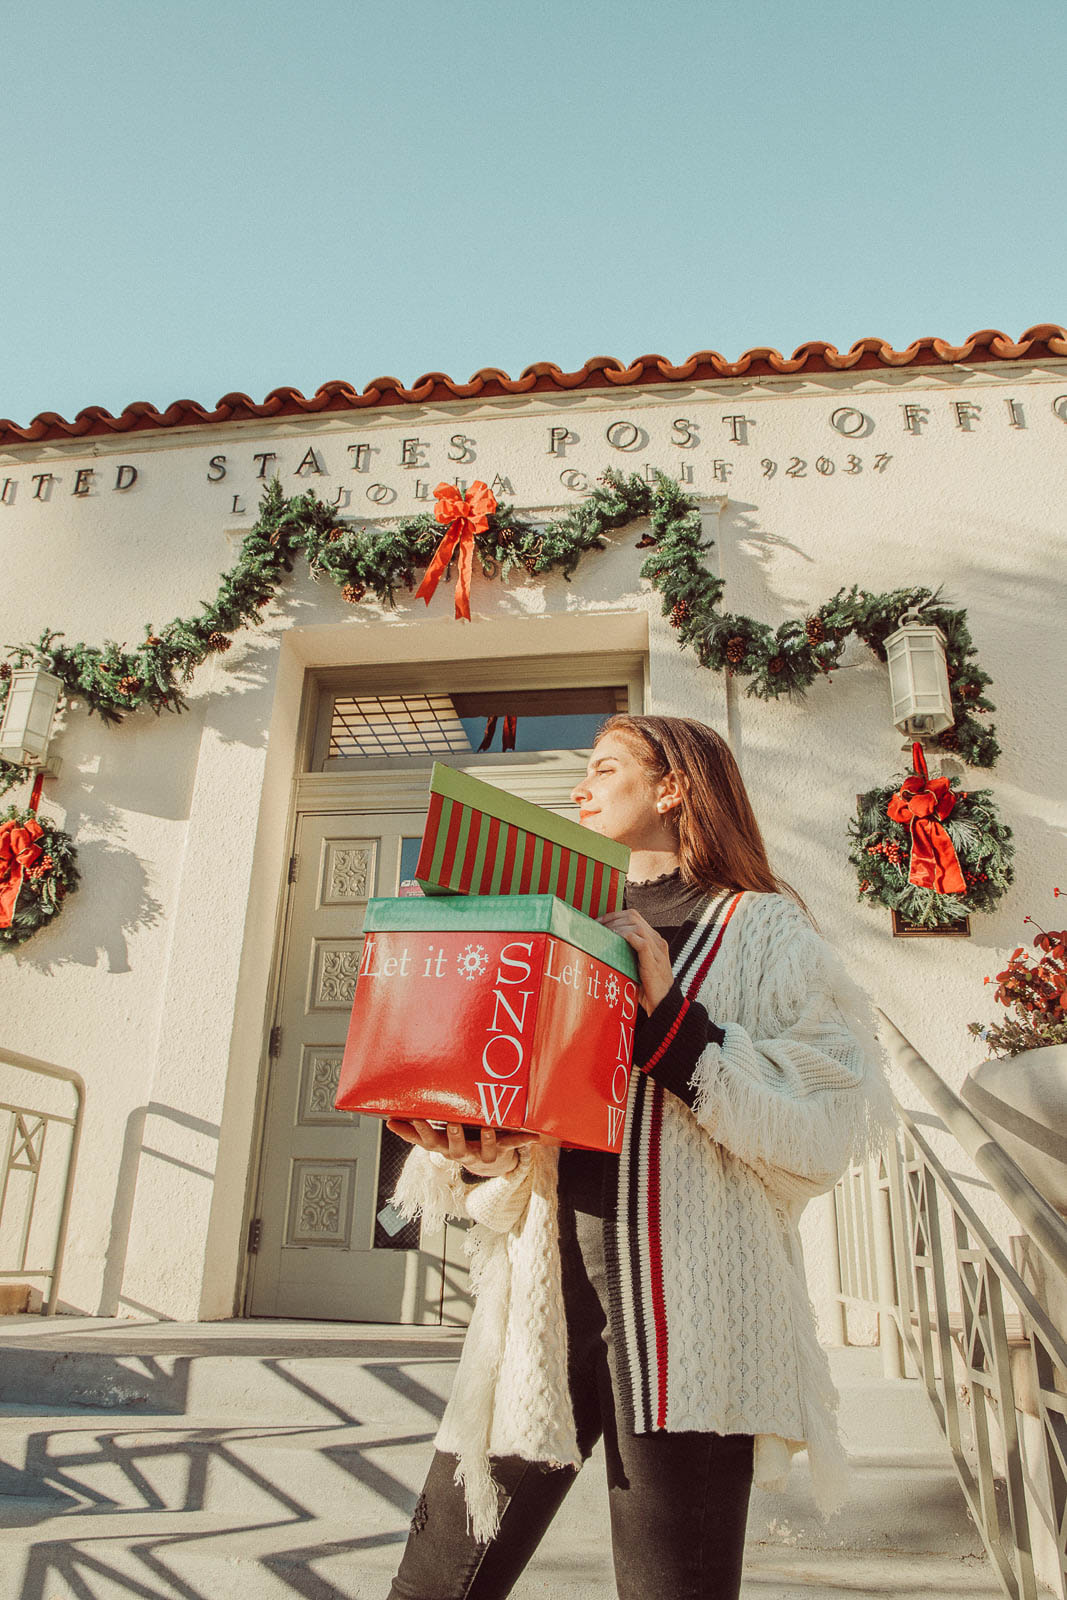 Woman wearing white sweater holding Christmas gifts in front of post office - 5 Creative Christmas Photoshoot Ideas to Try This Season